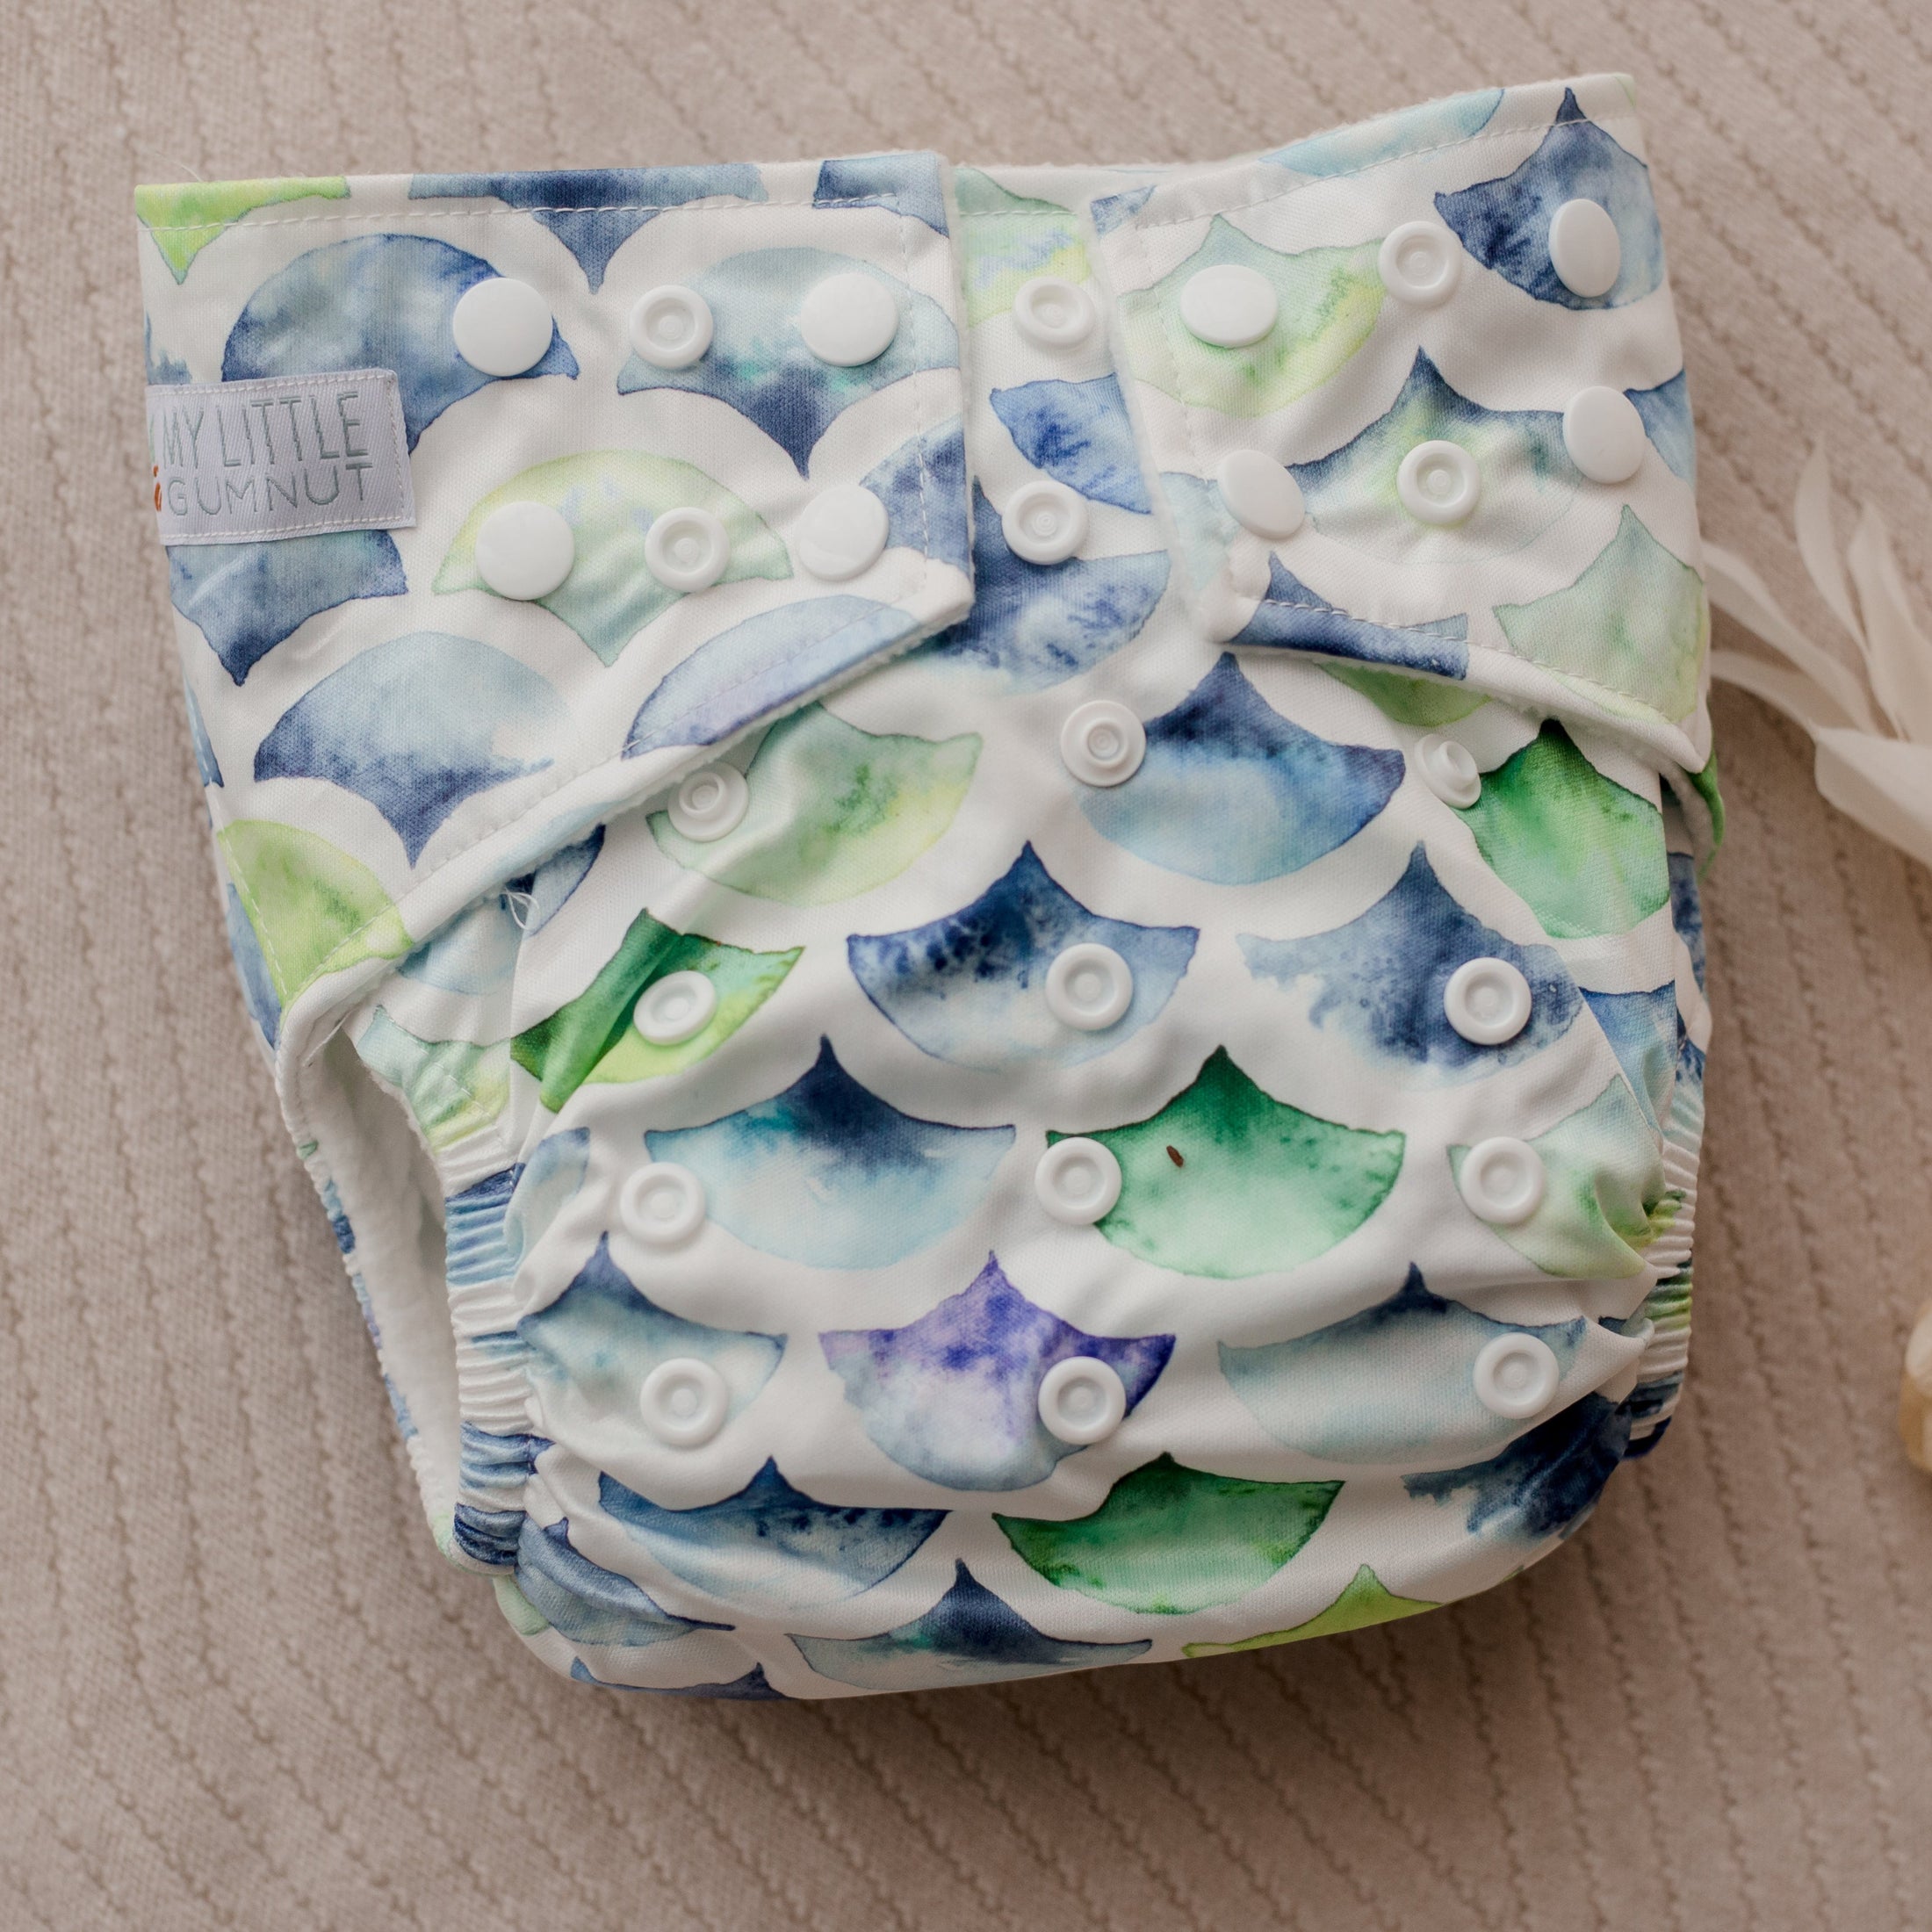 double gusset cloth nappies by my little gumnut. reusable nappy australia. cloth nappies australia. eco friendly nappies. mermaid nappy.